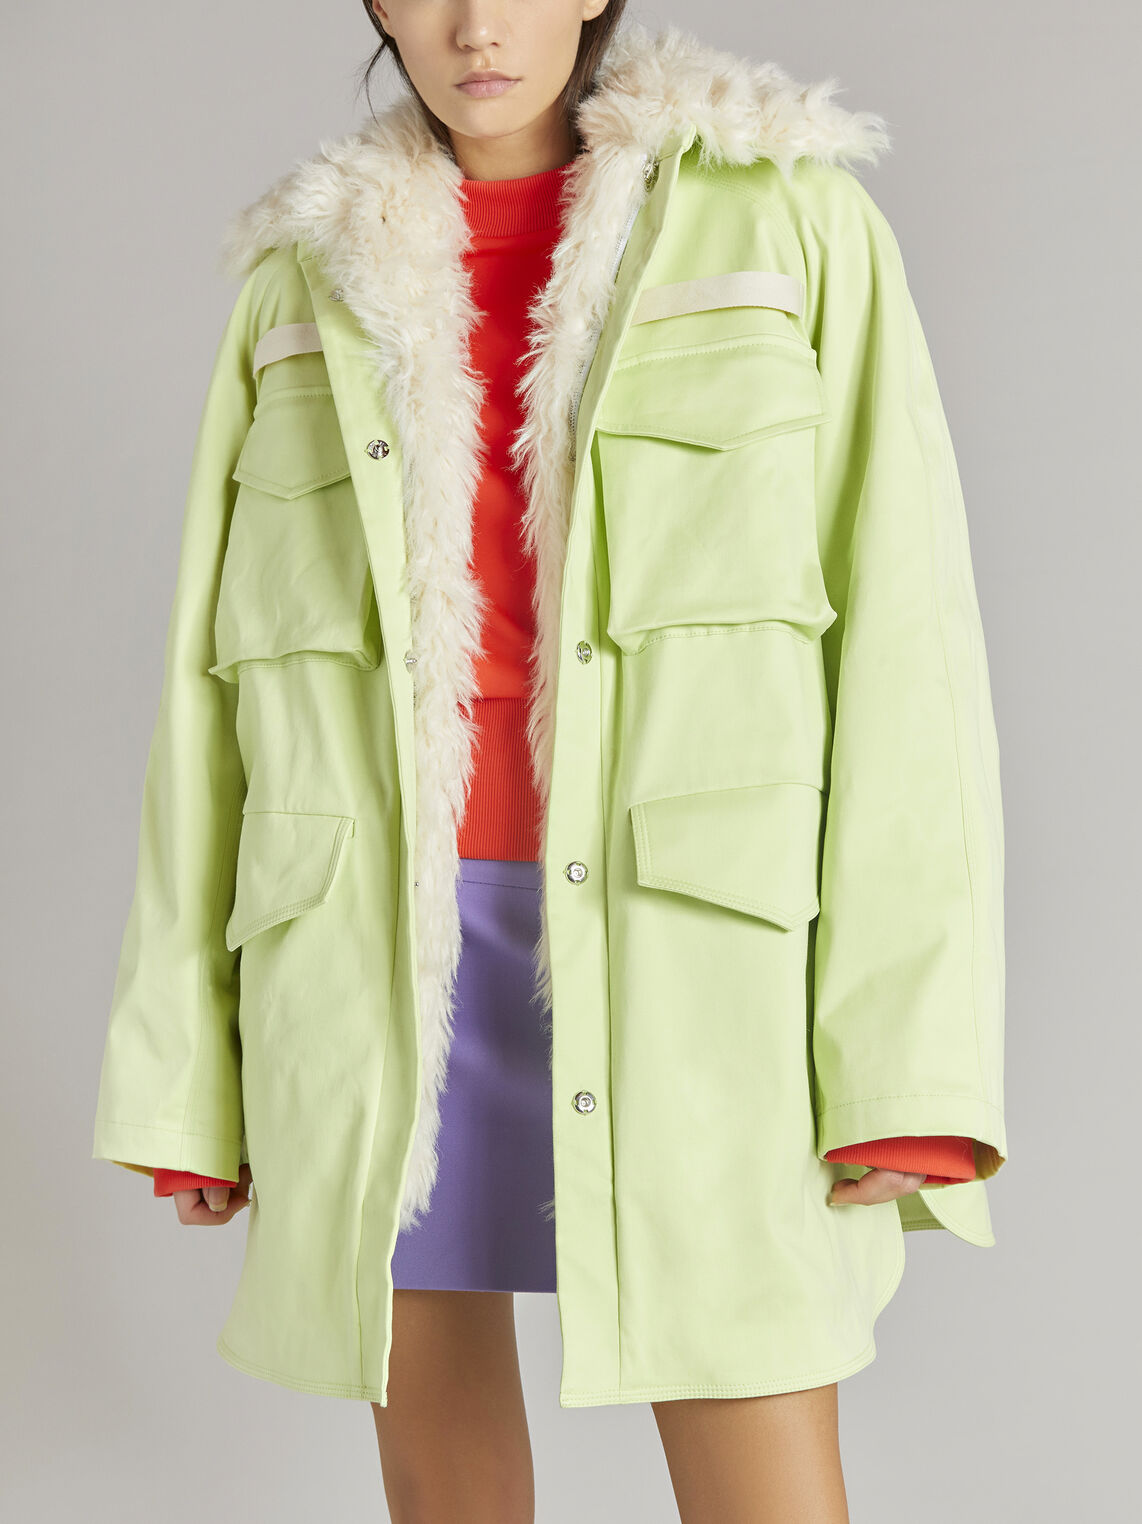 THE ATTICO "Janet" pale yellow field jacket 2